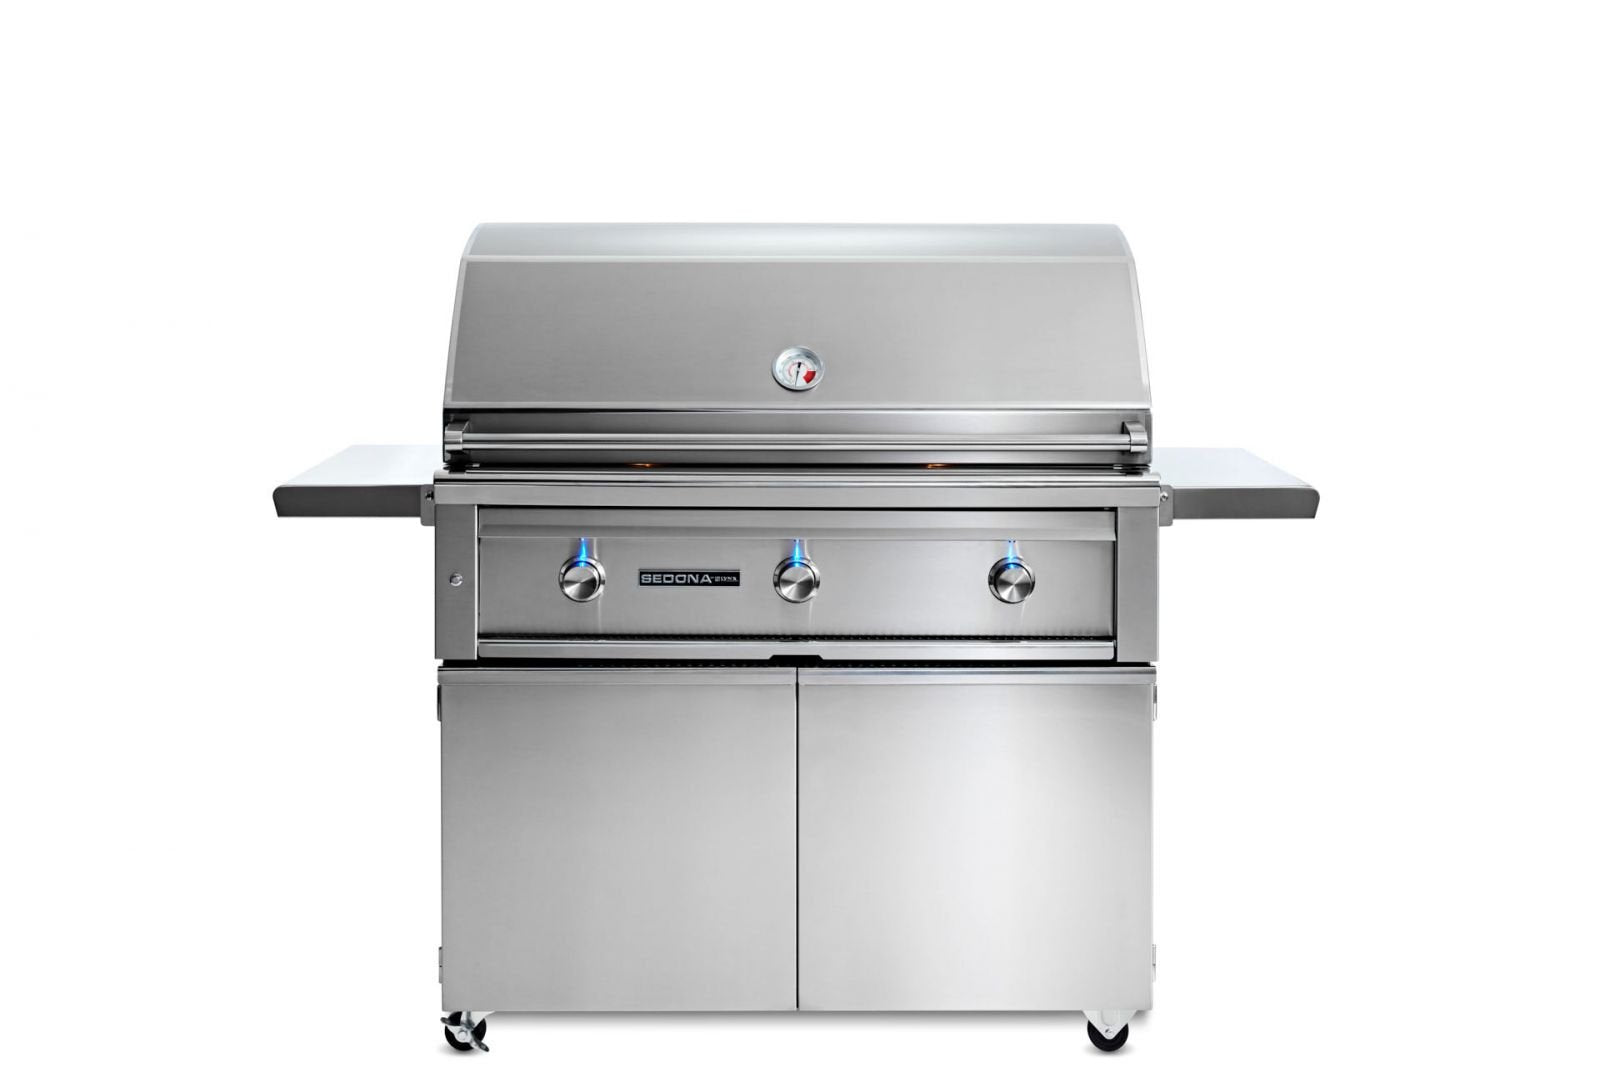 42" Freestanding Grill with 1 Prosear Infrared Burner and 2 Stainless Steel Burners (L700PSF)